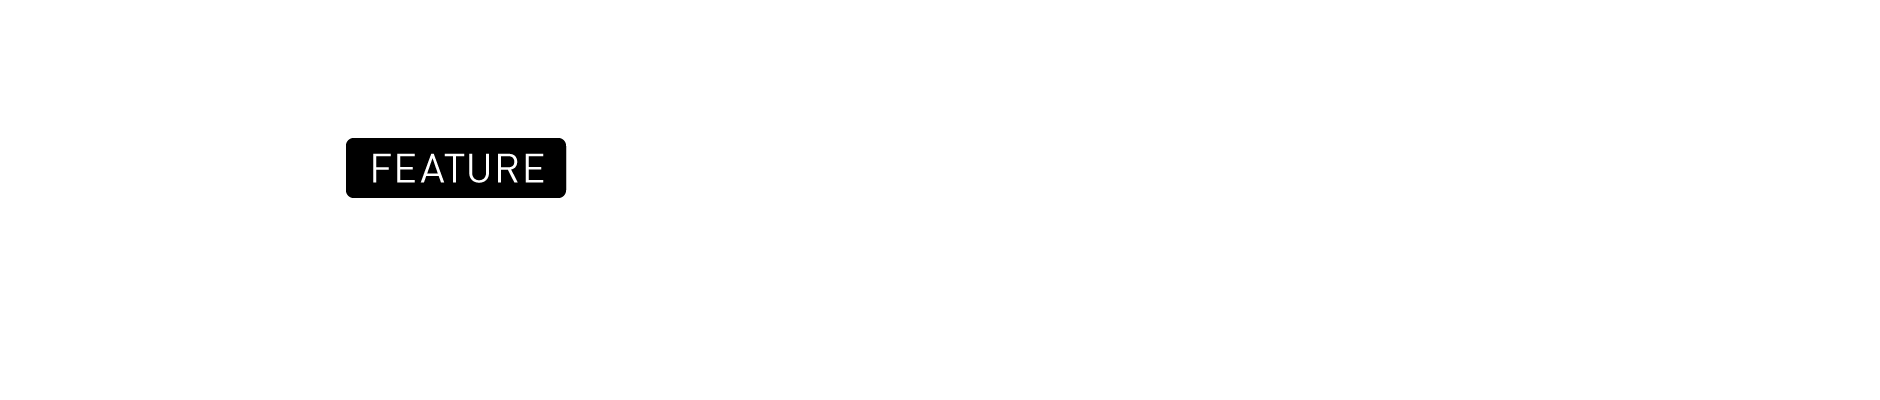 Feature: Business Strategy Excerpt from the Shareholder’s Meeting Presentation